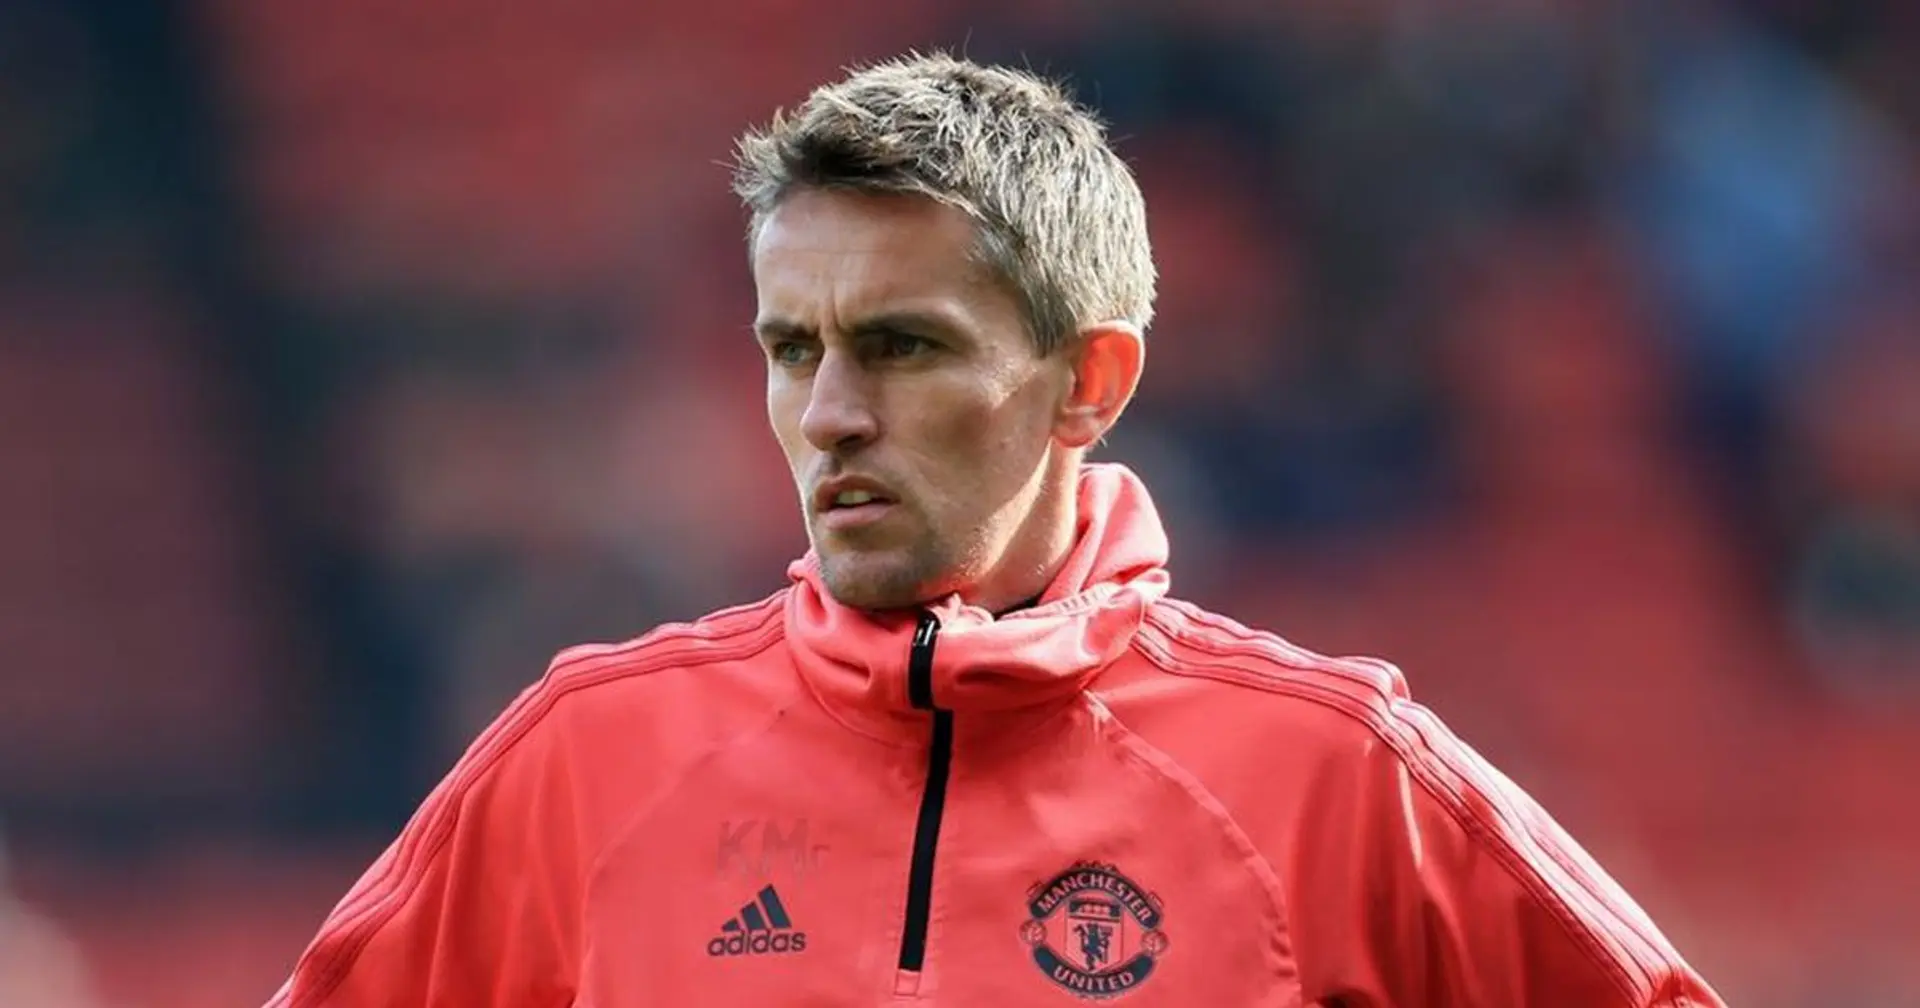 Kieran McKenna leaves Manchester United to become new Ipswich Town boss 